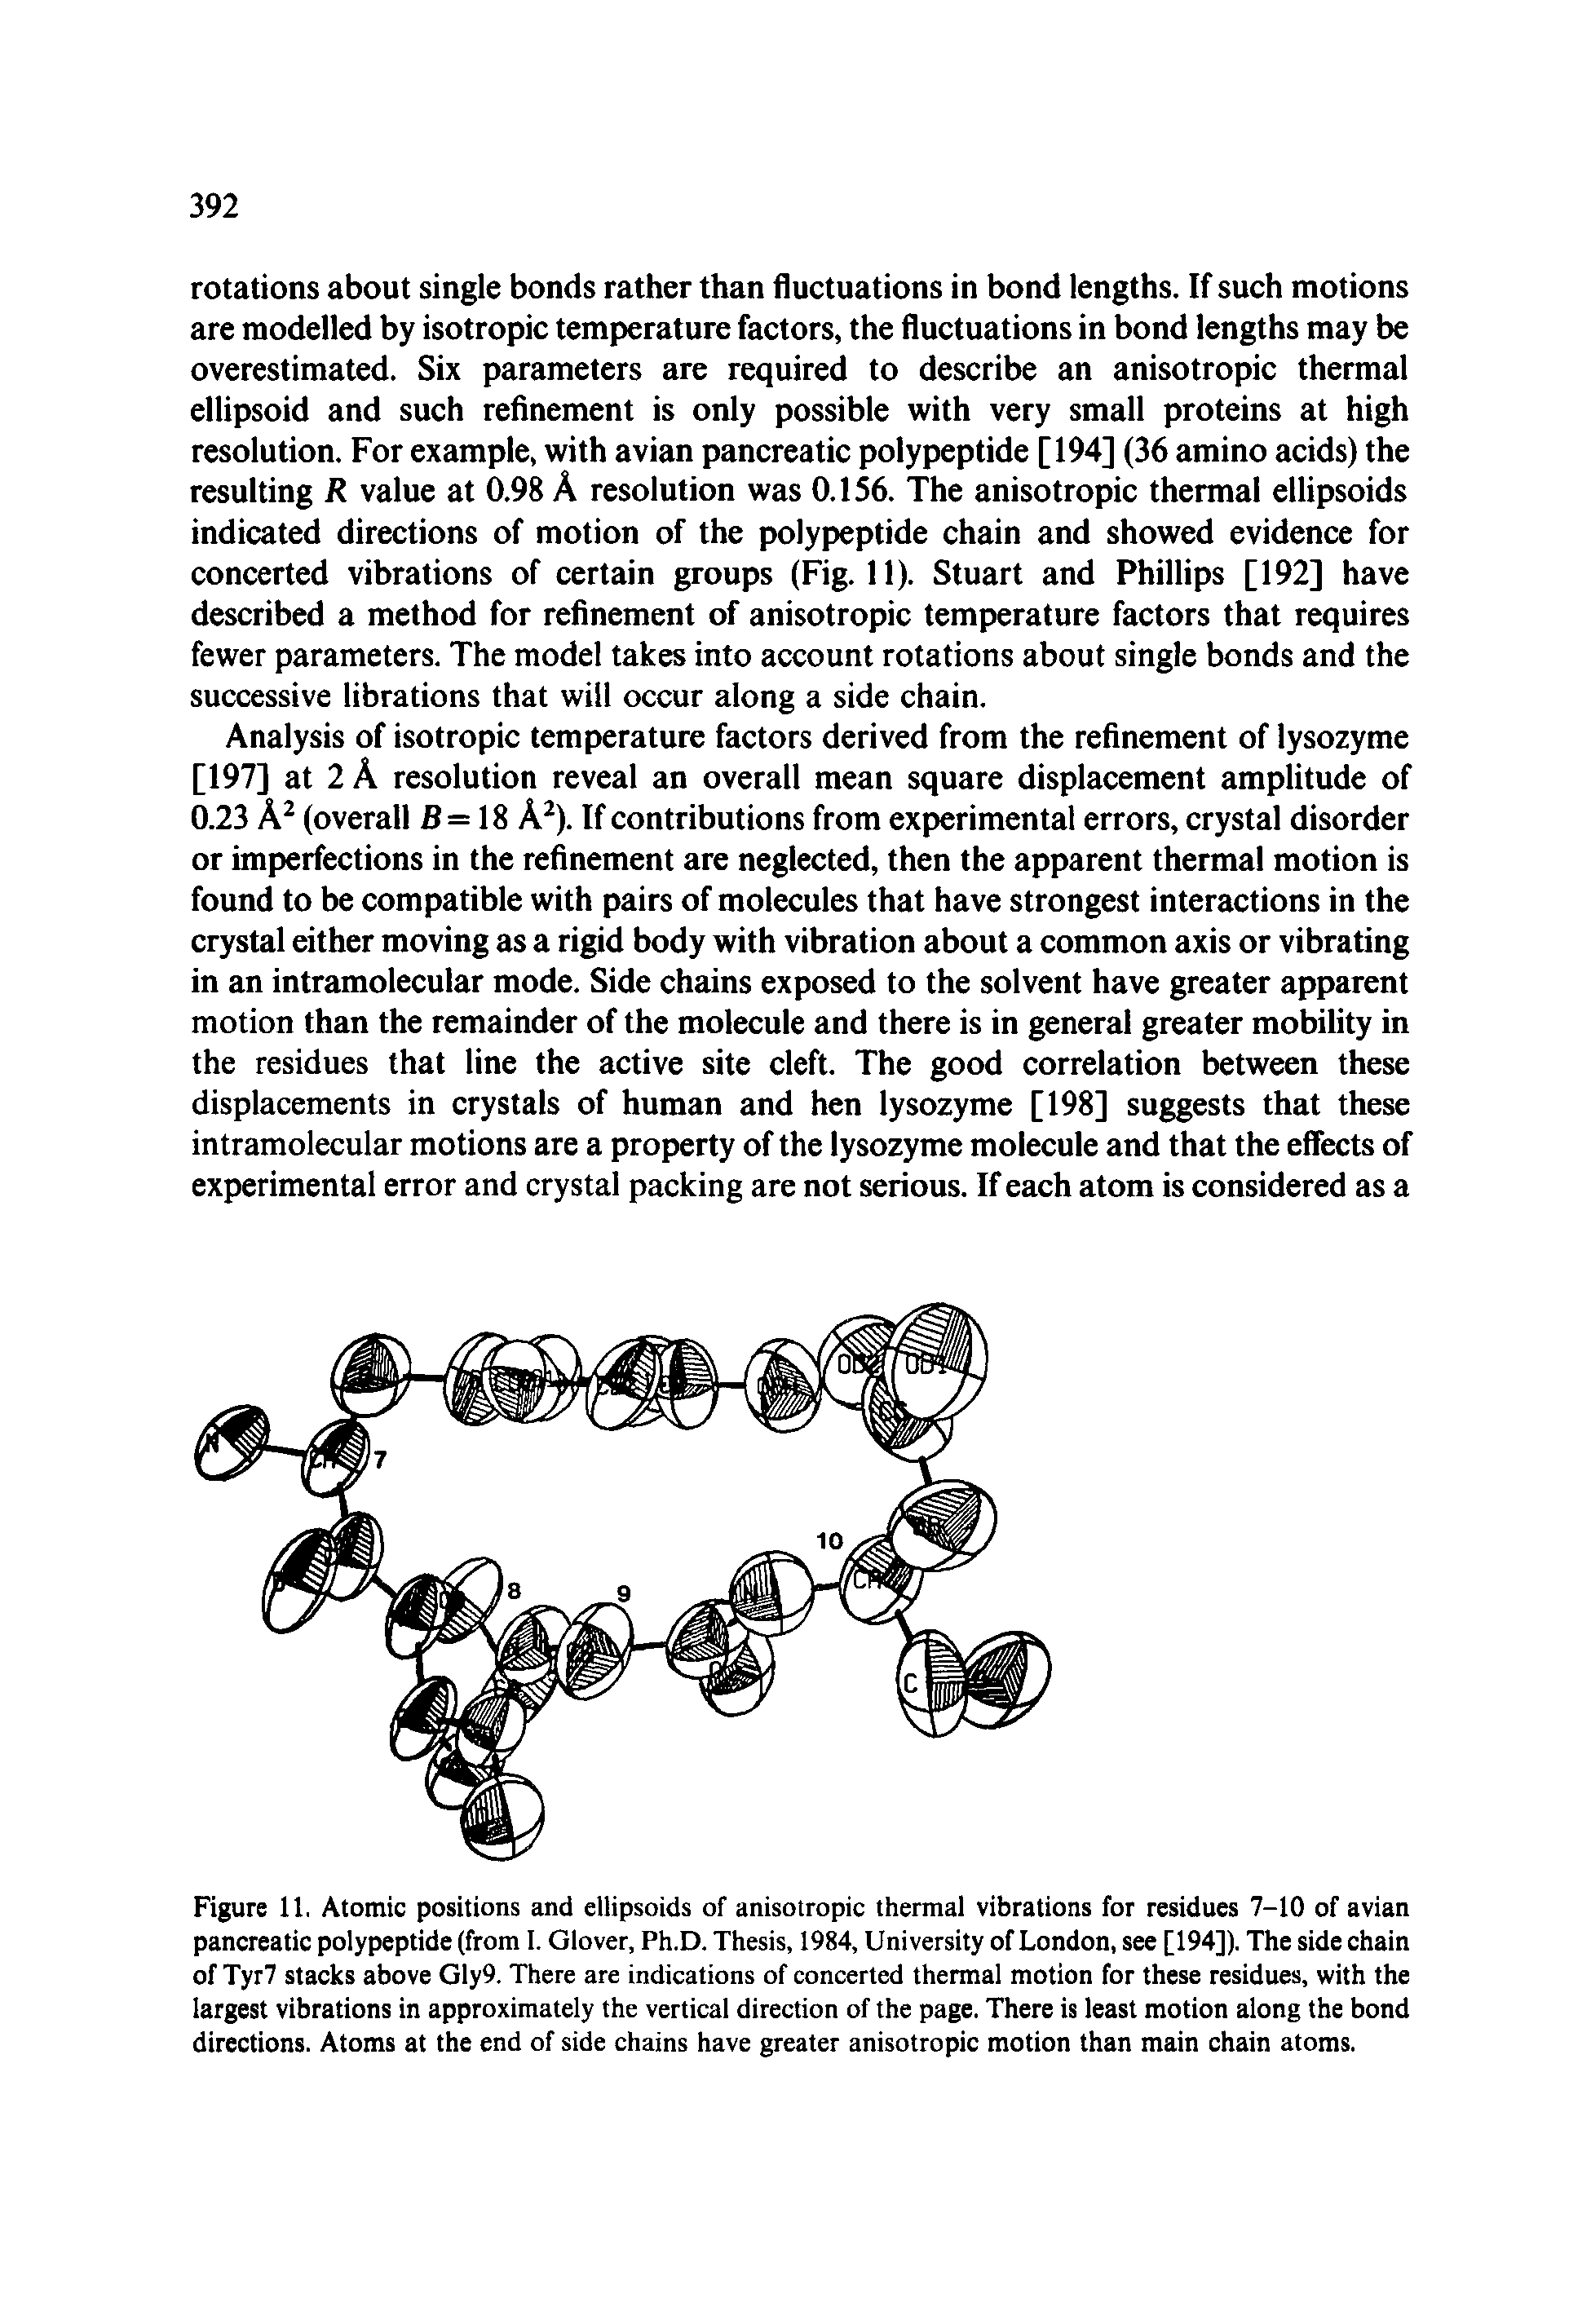 Figure 11, Atomic positions and ellipsoids of anisotropic thermal vibrations for residues 7-10 of avian pancreatic polypeptide (from 1. Glover, Ph.D. Thesis, 1984, University of London, see [194]). The side chain of Tyr7 stacks above Gly9. There are indications of concerted thermal motion for these residues, with the largest vibrations in approximately the vertical direction of the page. There is least motion along the bond directions. Atoms at the end of side chains have greater anisotropic motion than main chain atoms.